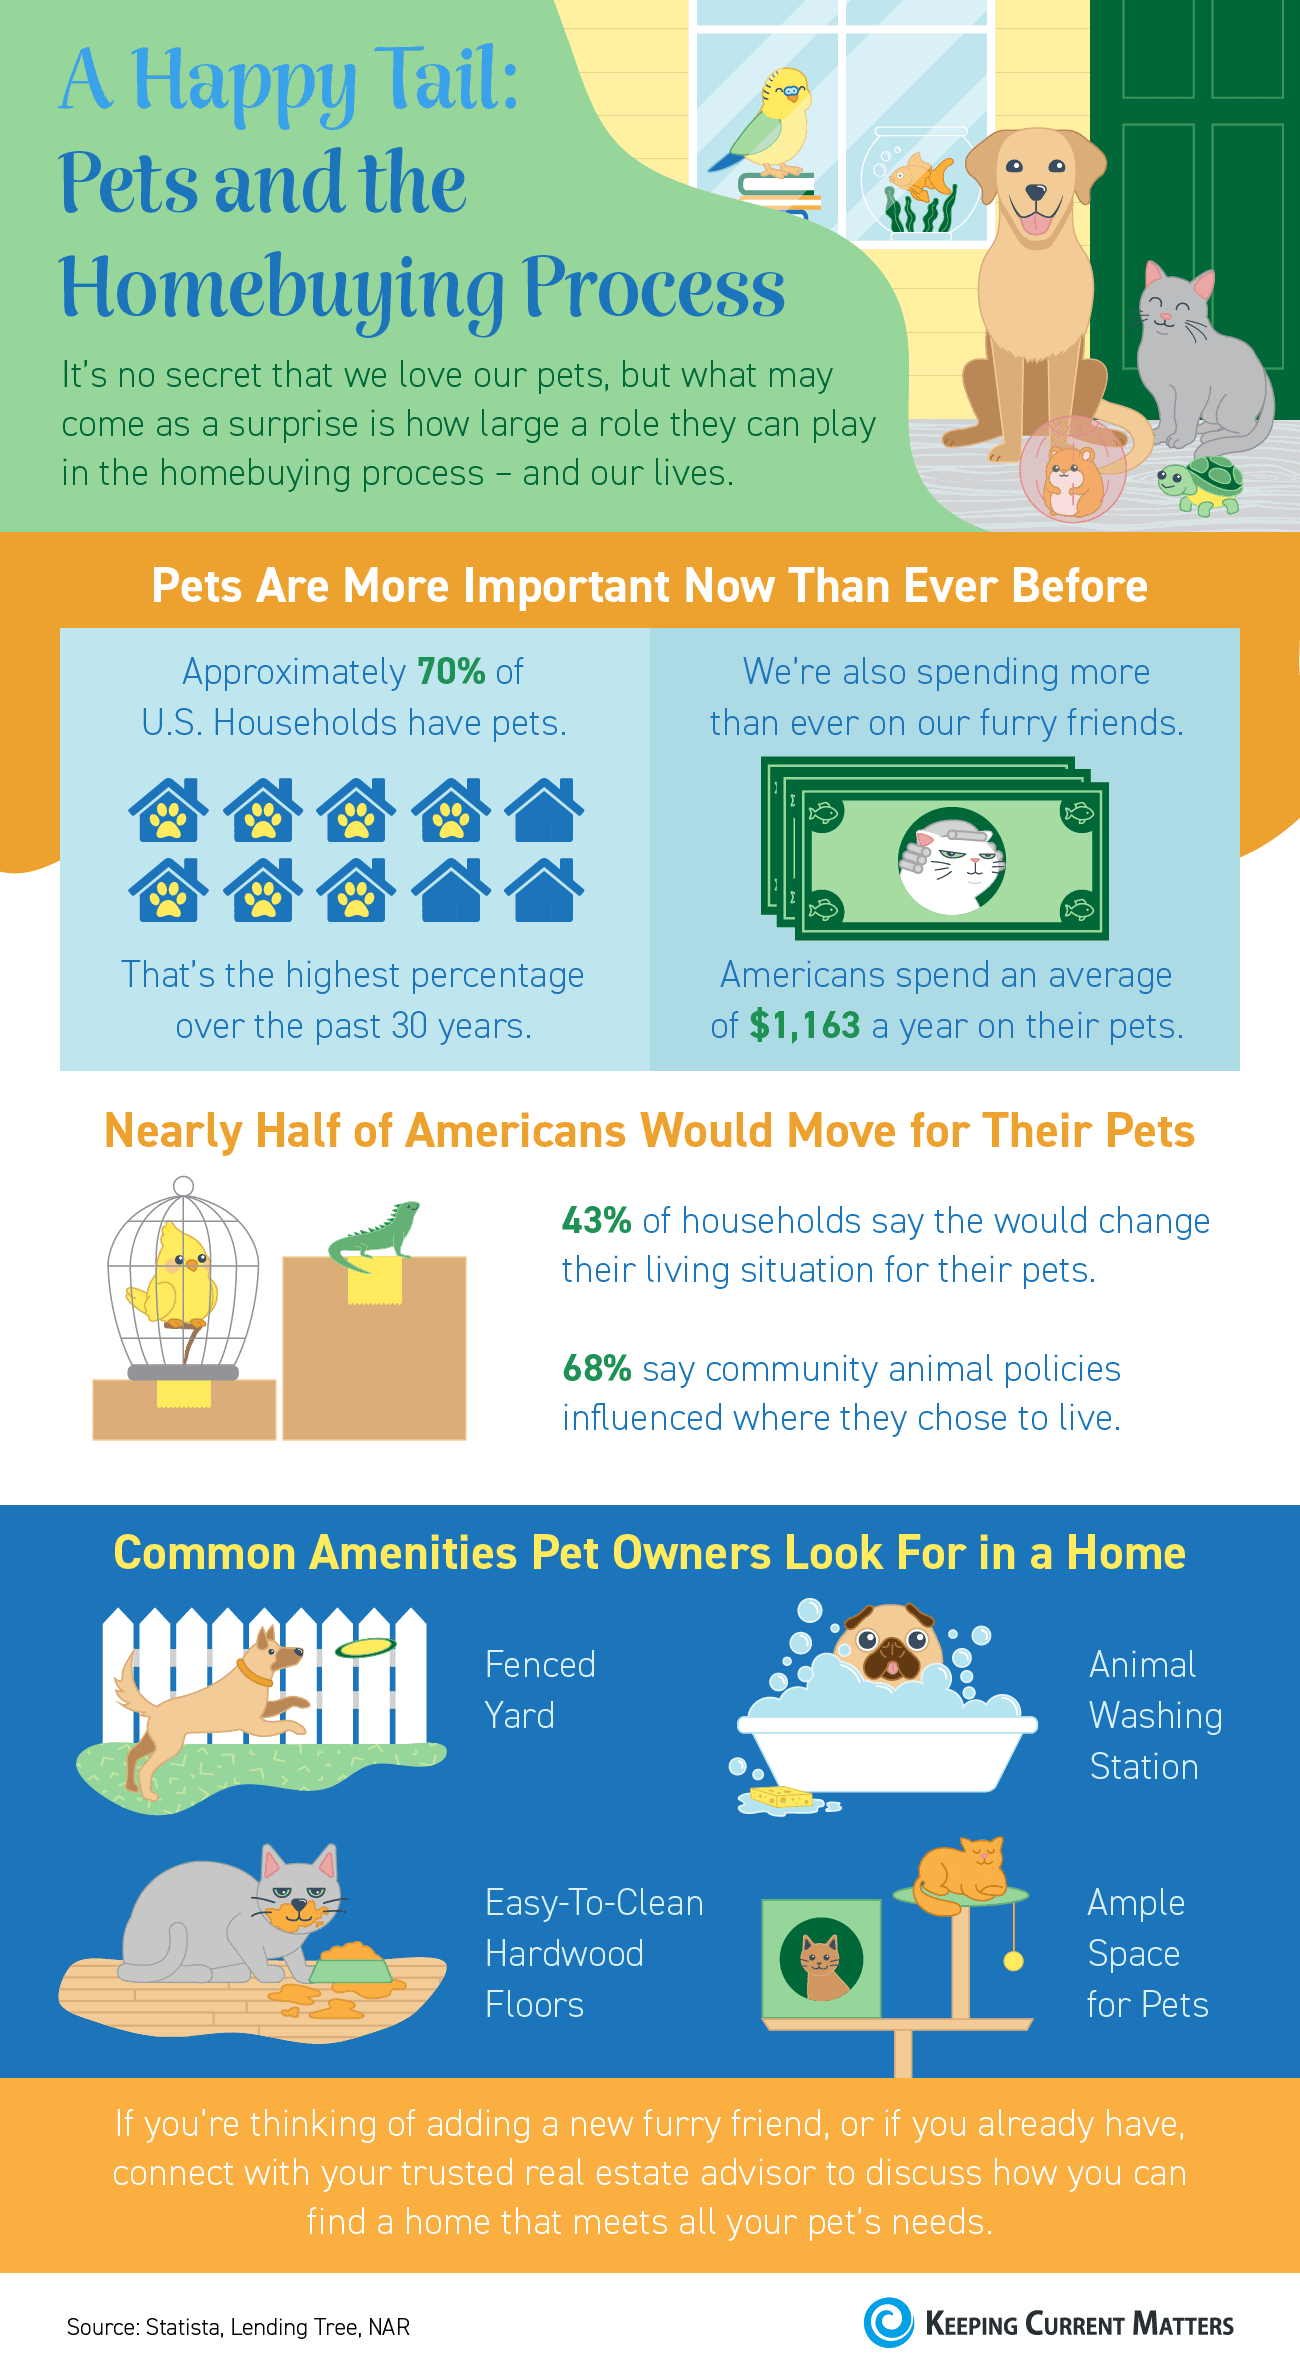 A Happy Tail: Pets and the Homebuying Process